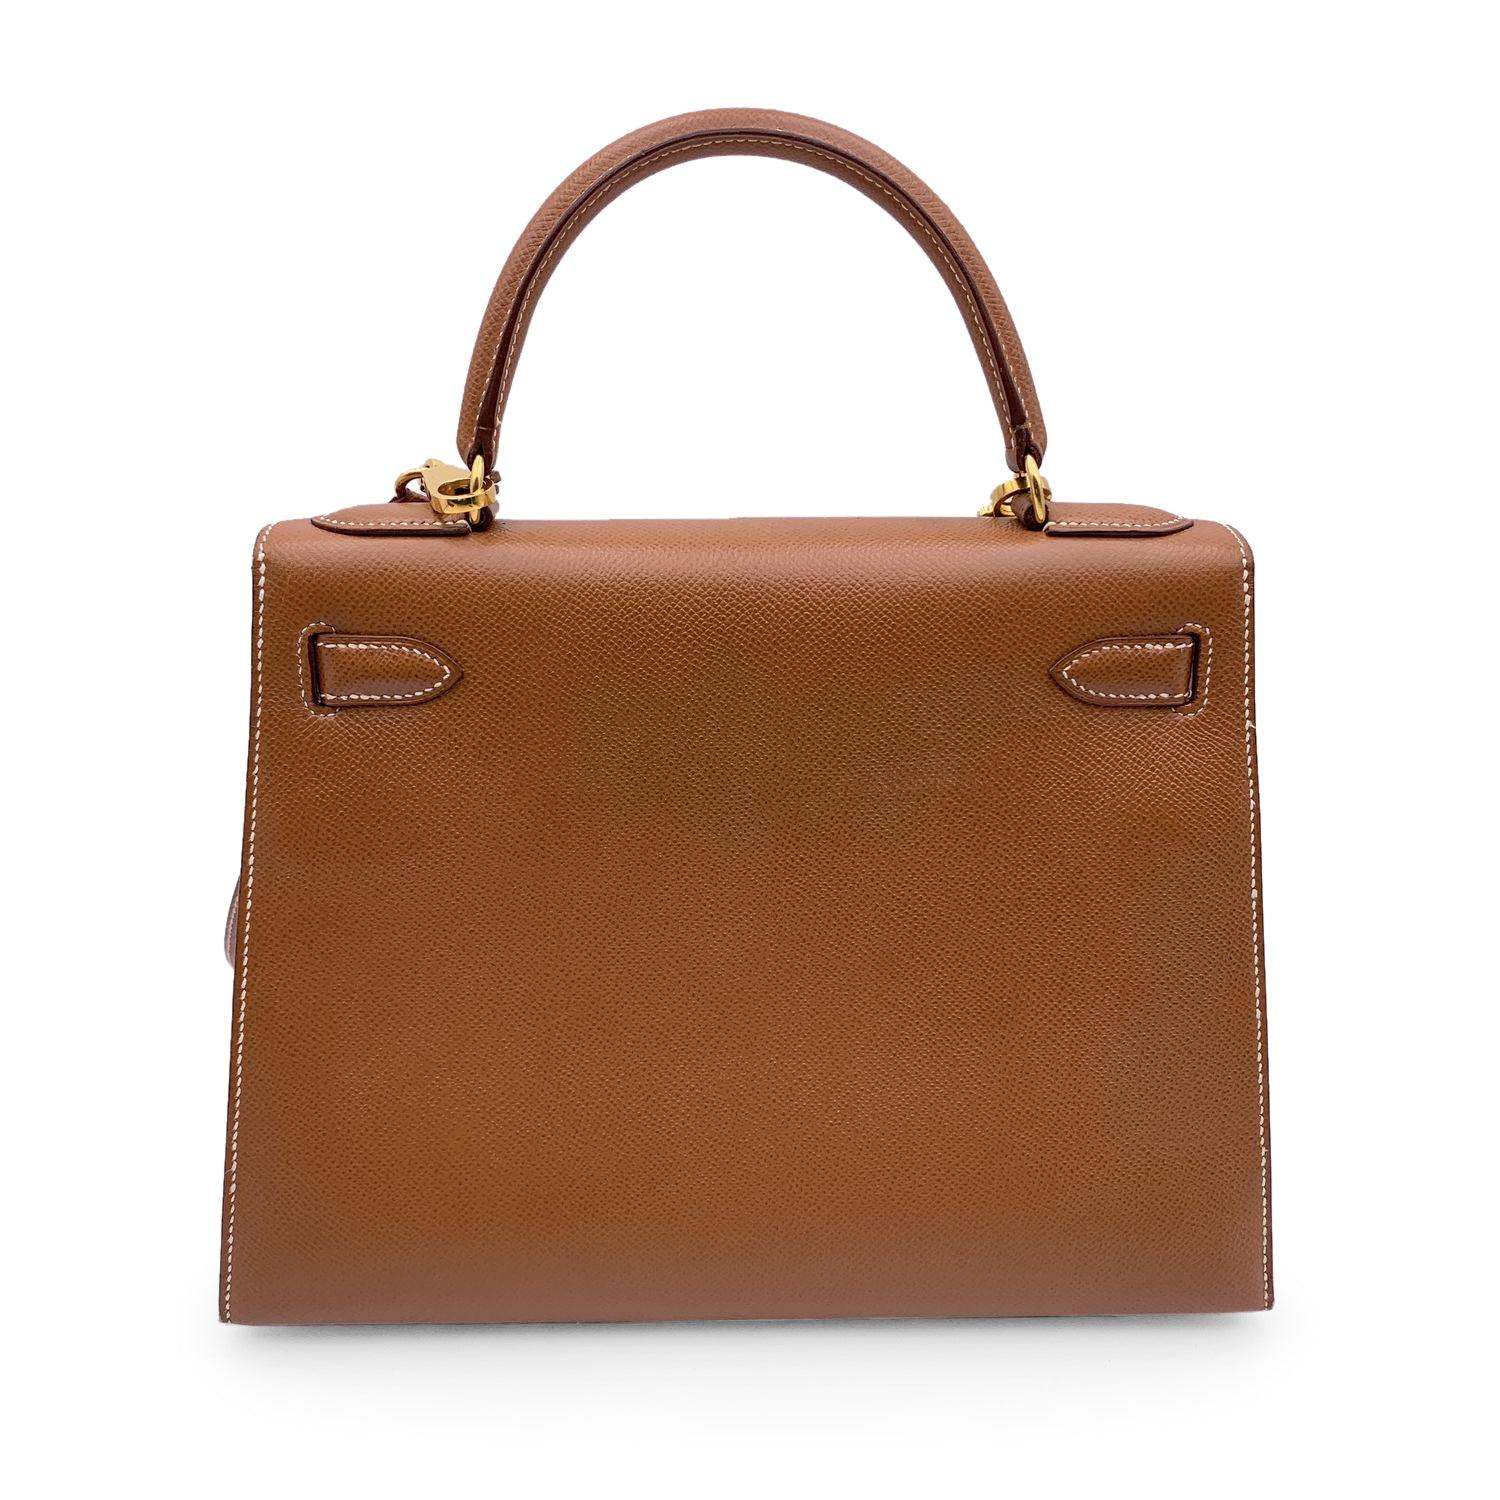 This beautiful Bag will come with a Certificate of Authenticity provided by Entrupy. The certificate will be provided at no further cost.

The famous Hermes KELLY BAG 28, mod. Sellier , crafted in beige Couchevel leather from 1993 (blind stamp is